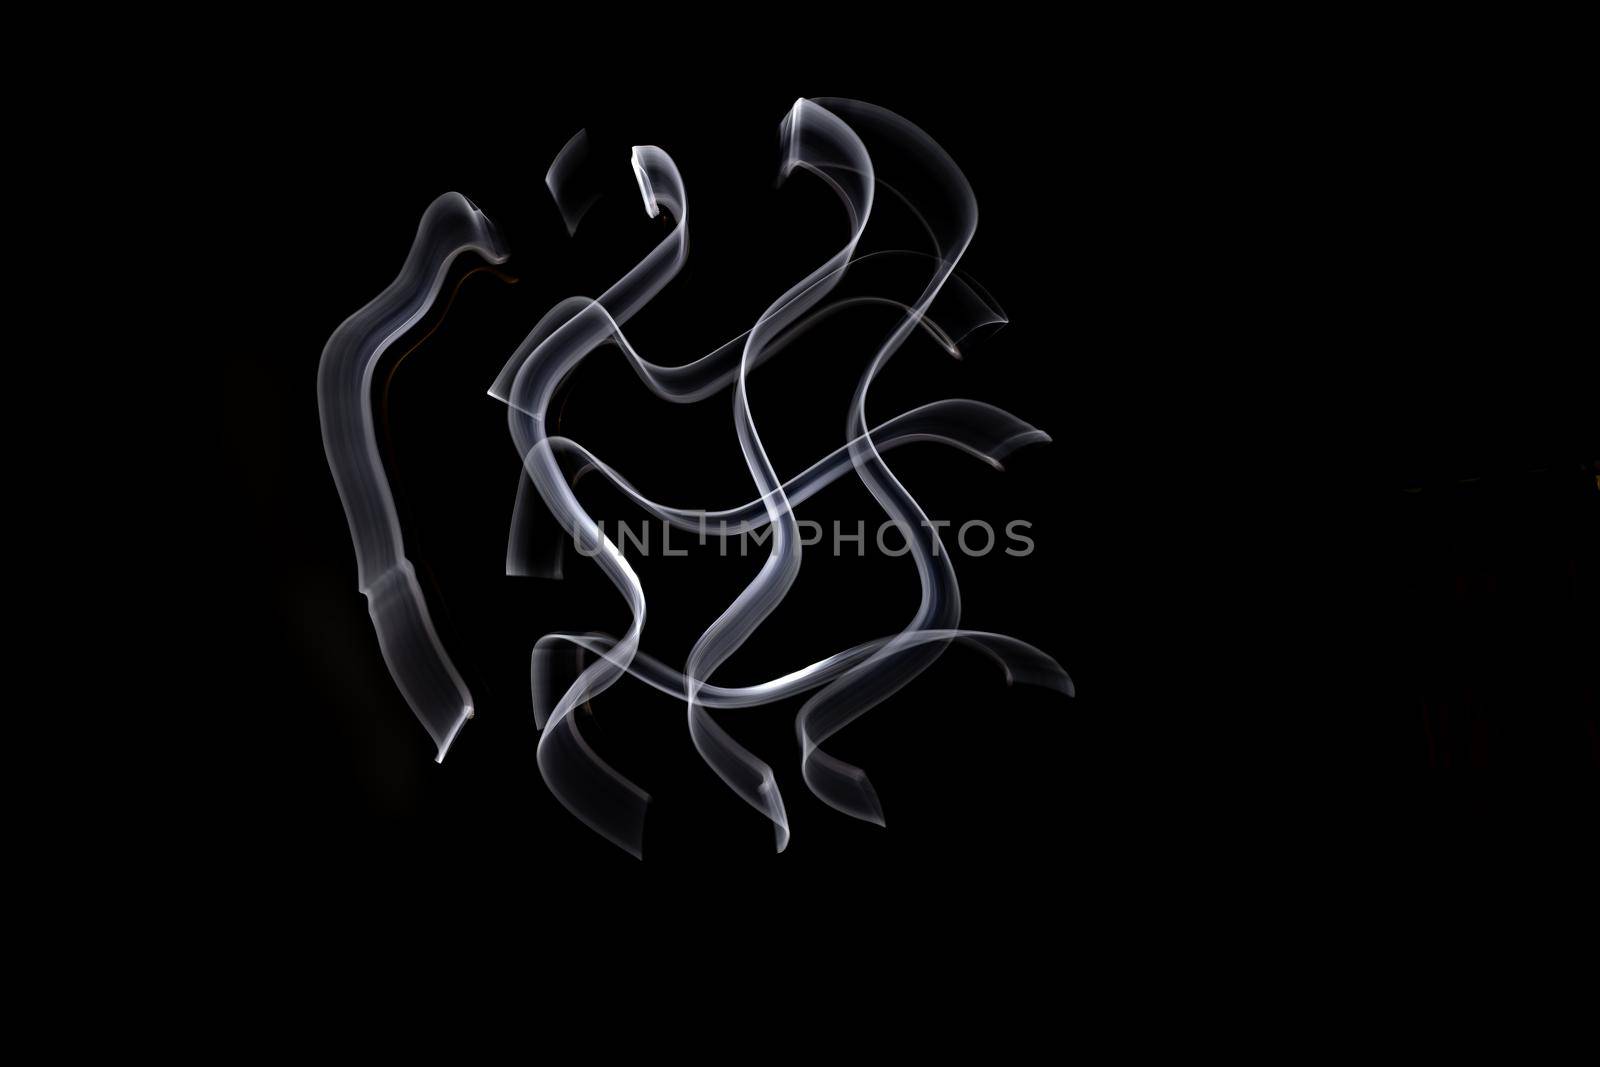 Unique, long exposure, white Led light painting photograph of abstract pattern on black background. by lalam